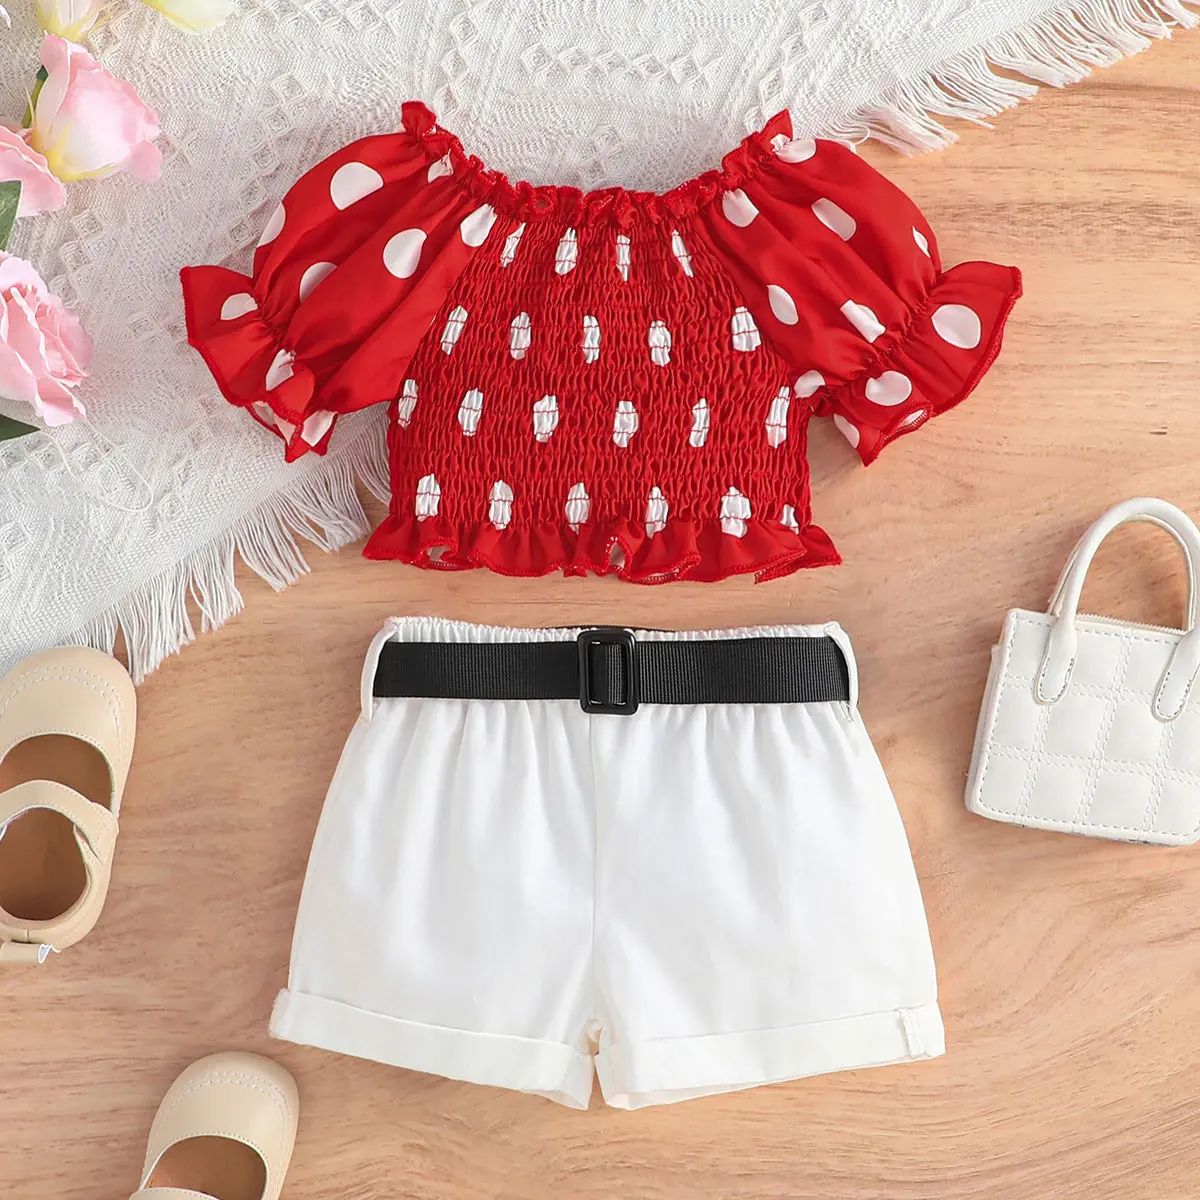 INS 2023 newborn infant baby clothing sets short sleeve shirts+shorts two piece toddler kids summer outfits